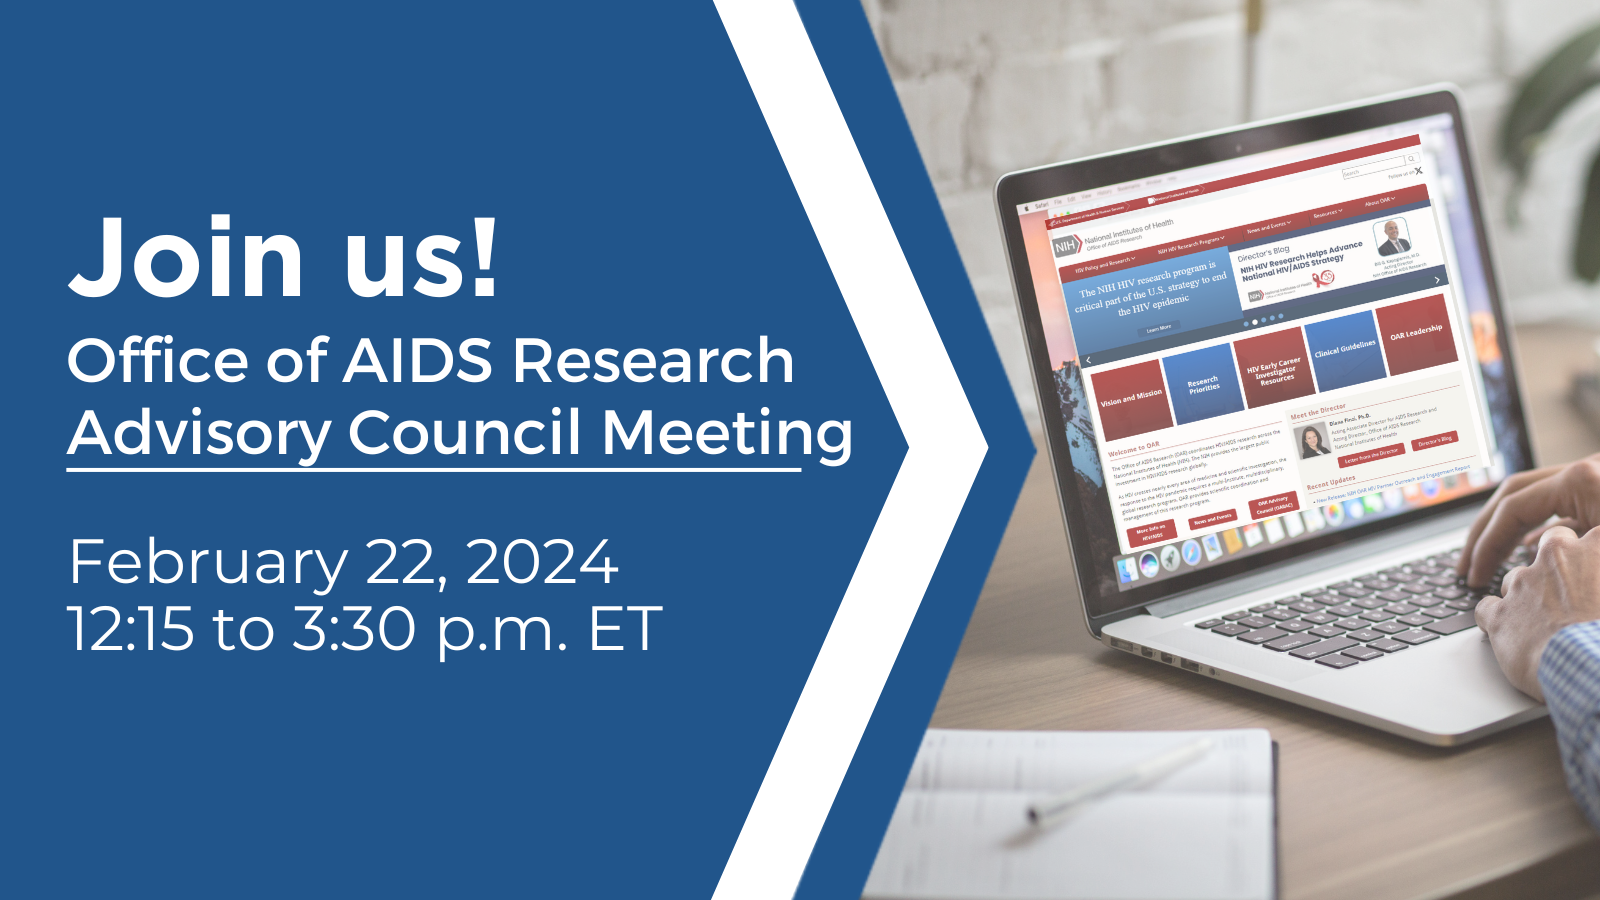 Join Us! Office of AIDS Research Advisory Council Advisory Meeting February 22, 2024.